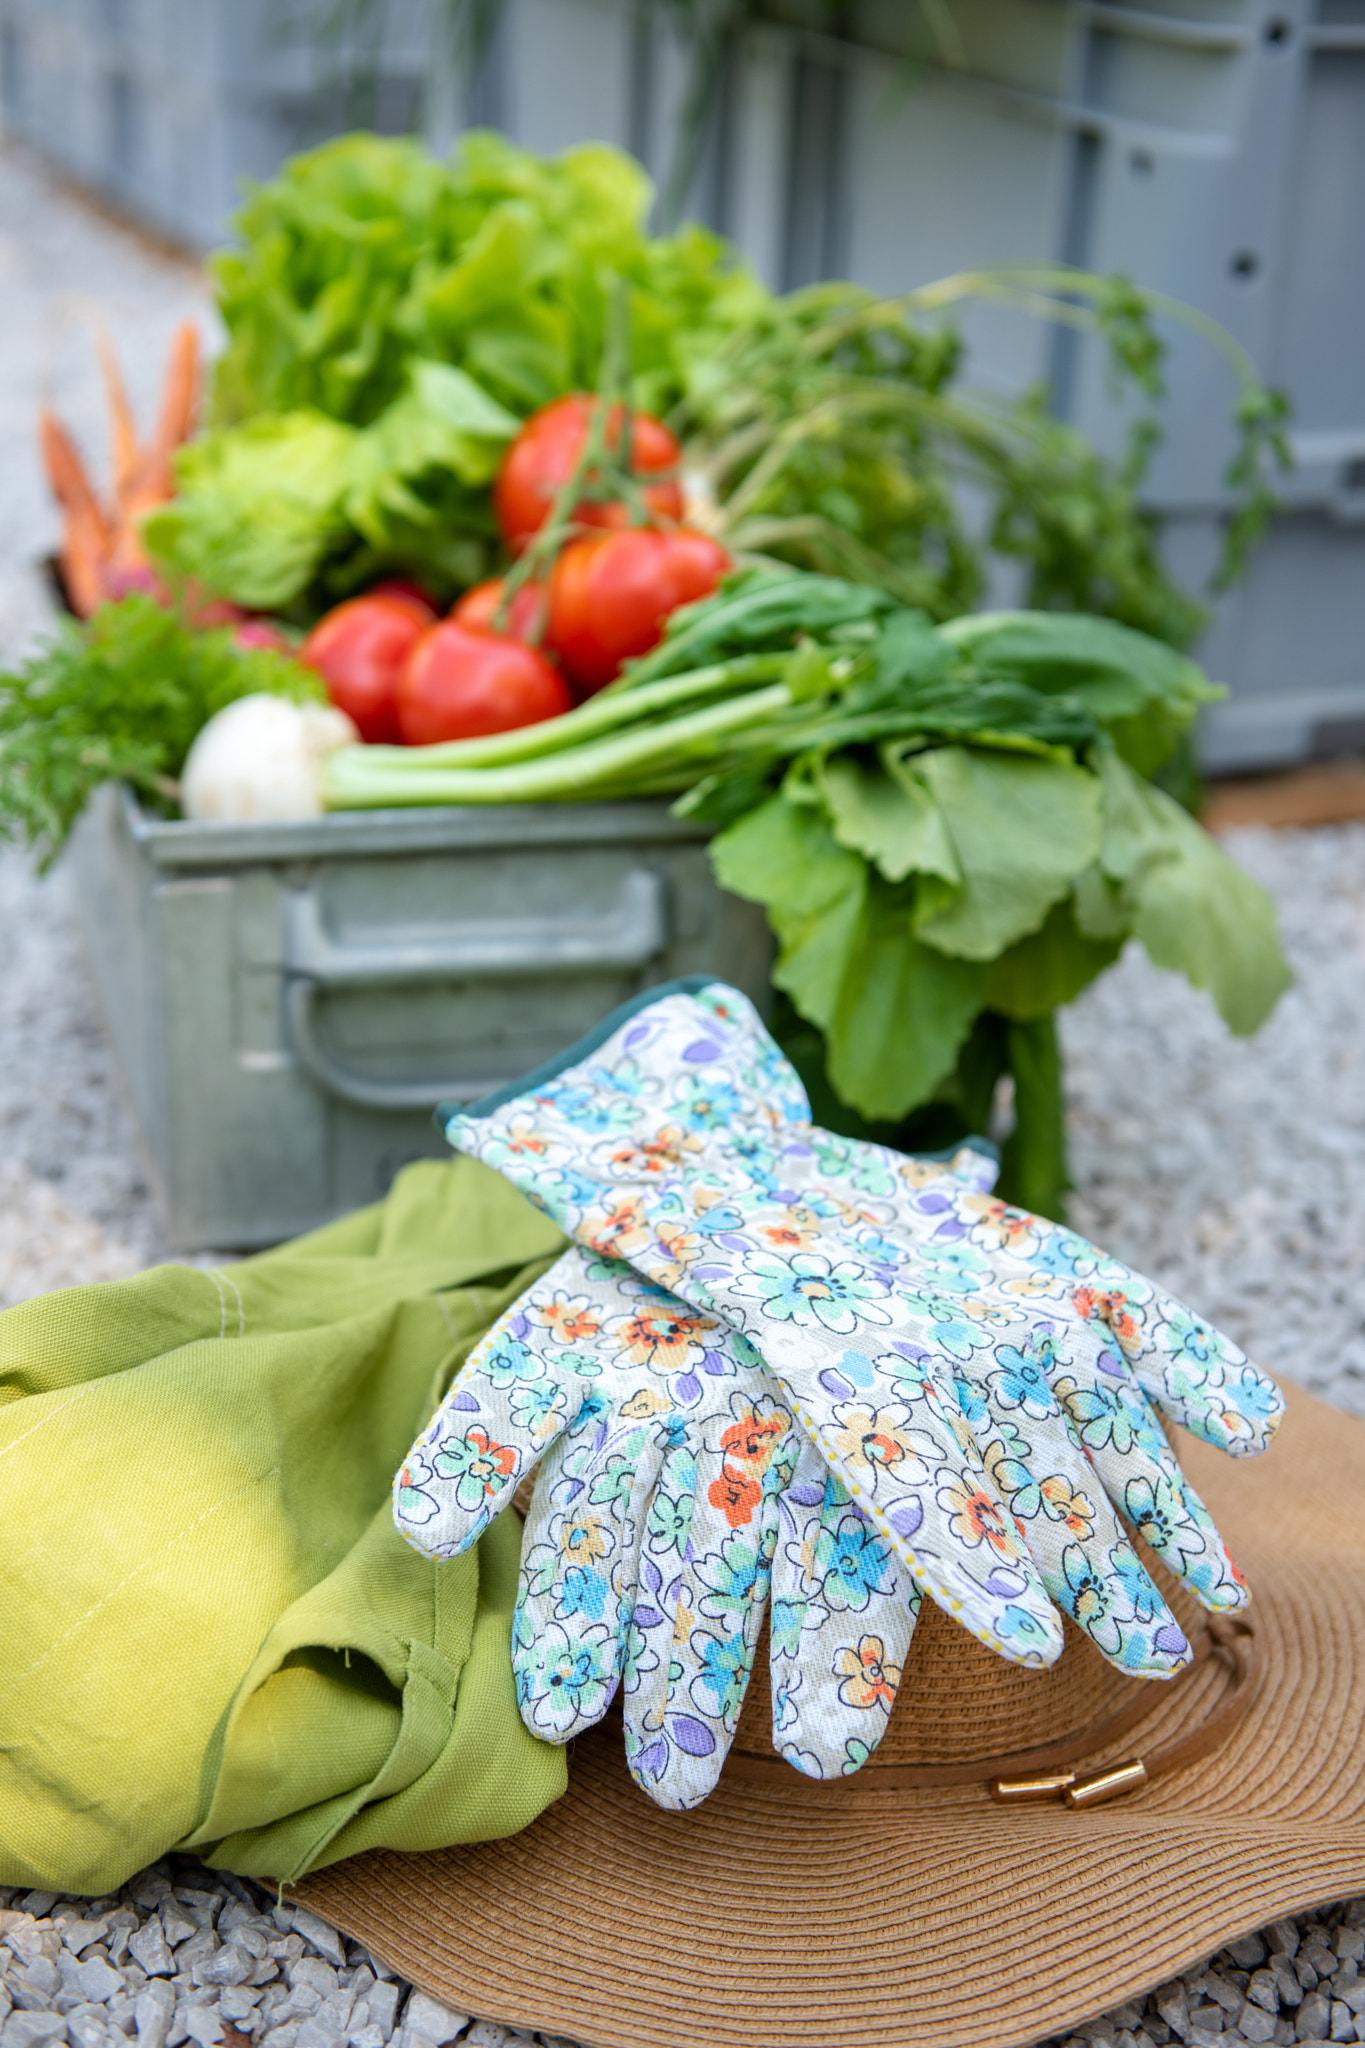 Crate full of freshly harvested vegetables, straw hat and gloves in a garden. Homegrown bio...